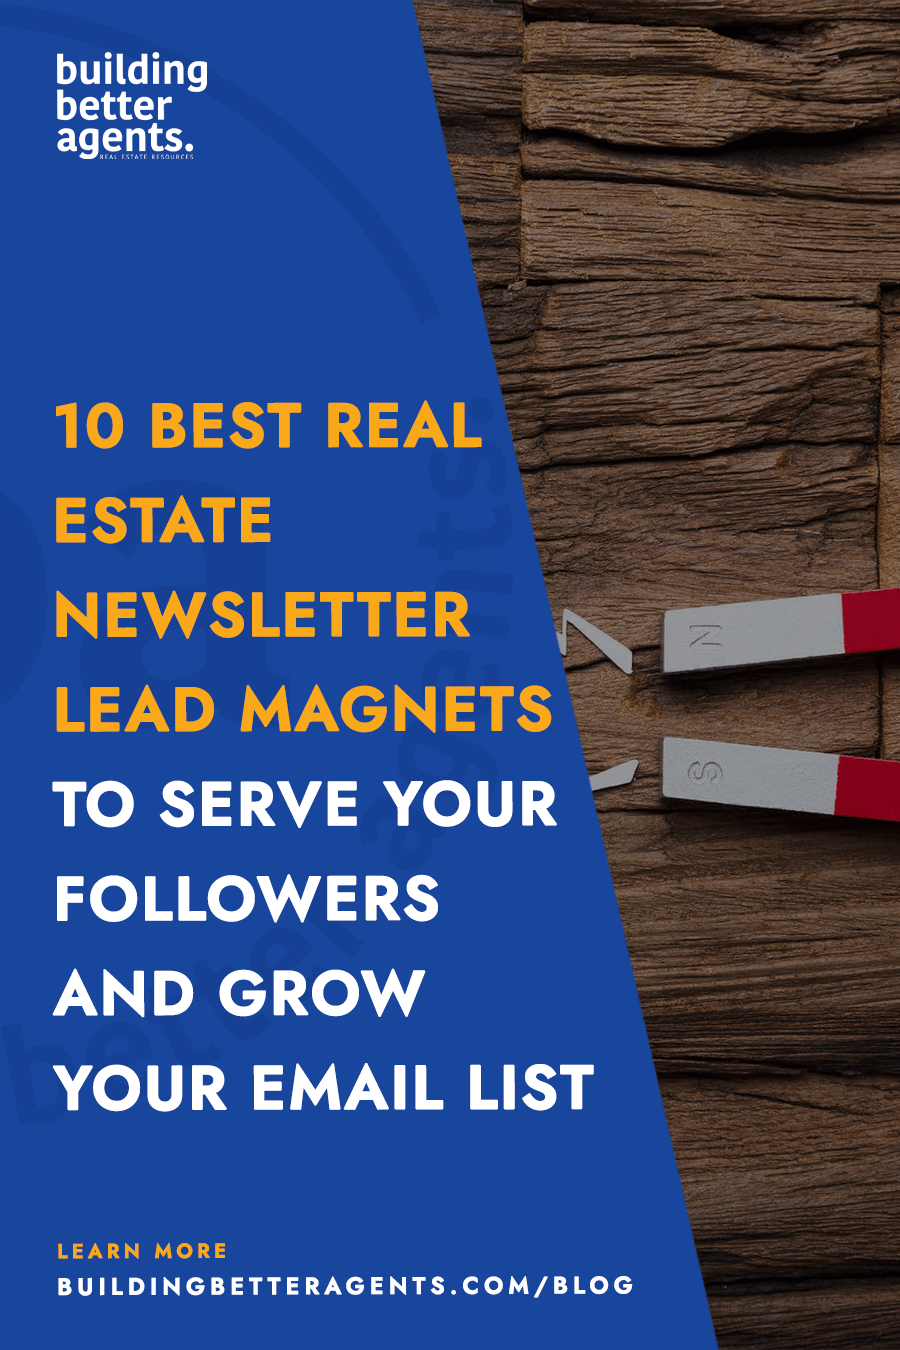 10 Best Real Estate Newsletter Lead Magnets to Serve your Followers and Grow Your Email List